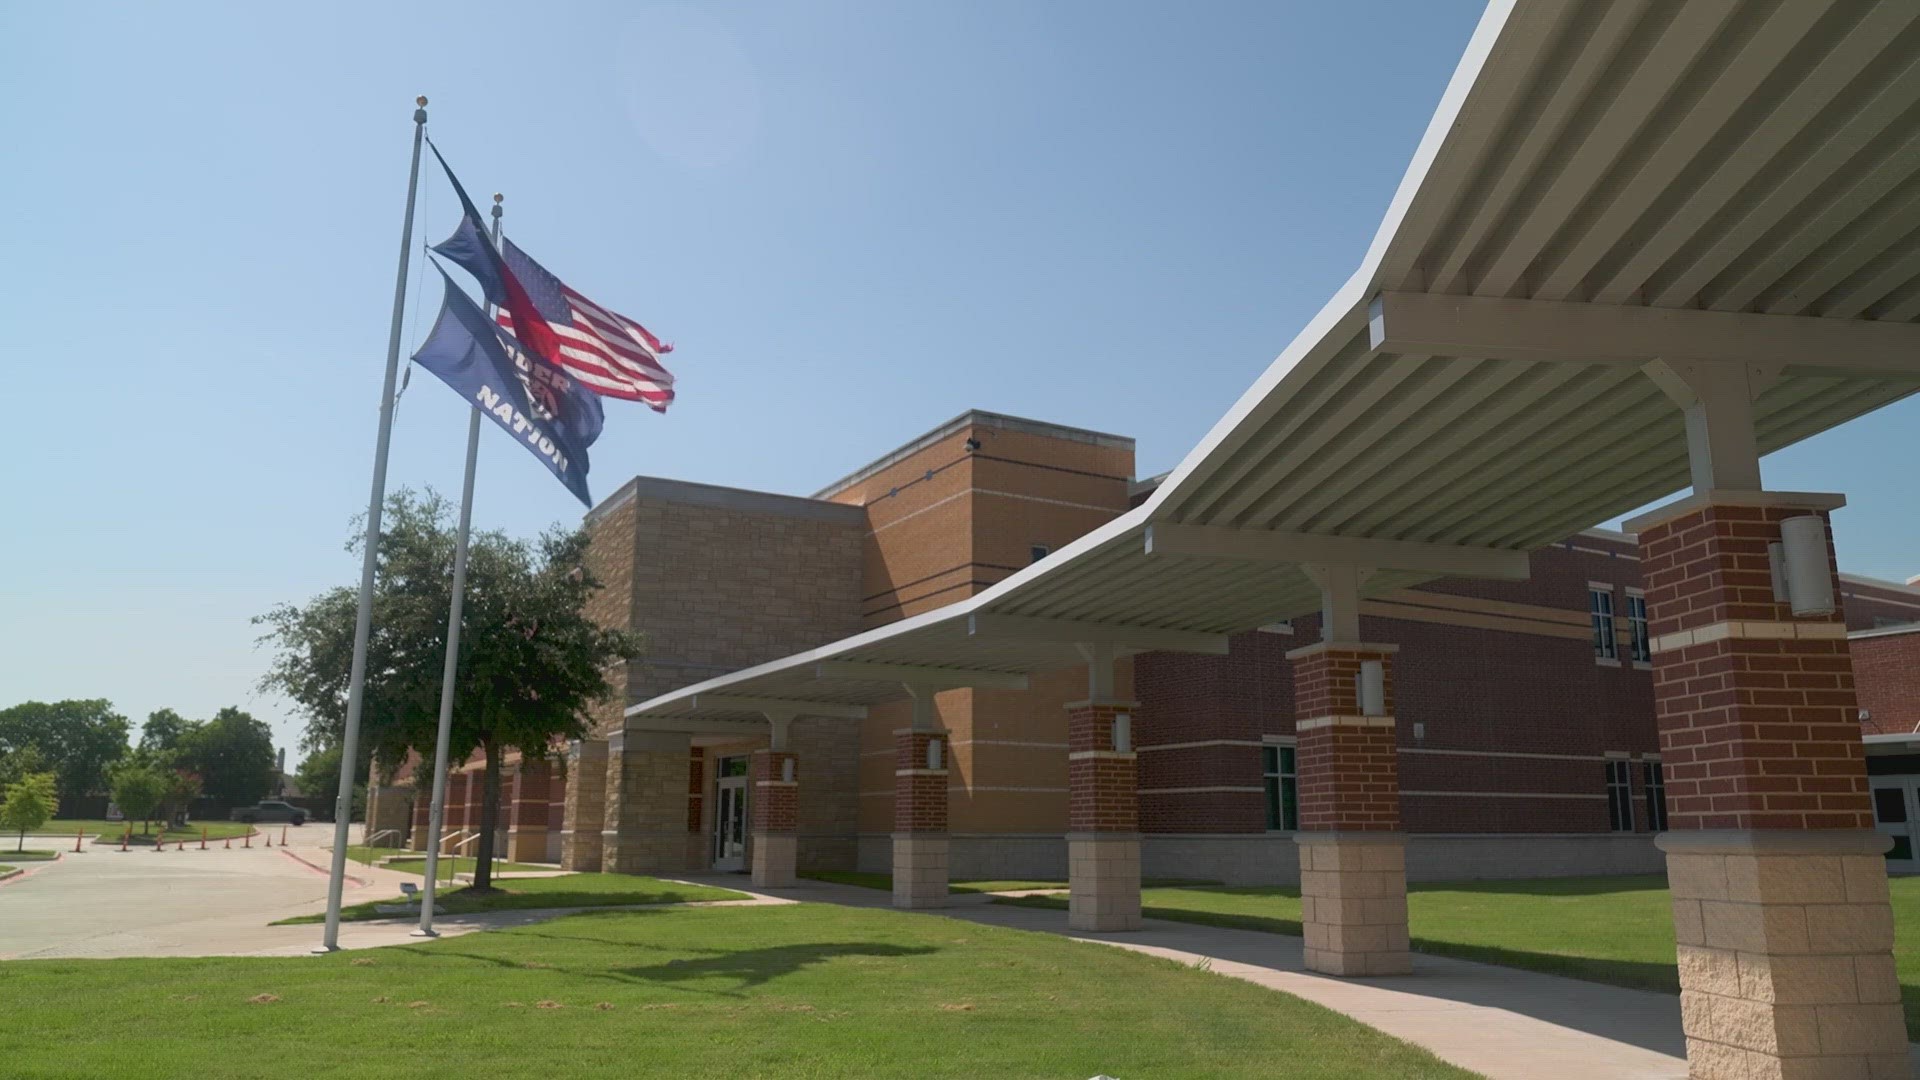 When classes beginning soon, Wylie ISD will meet new state-mandated standards for campus security with the help of a private security company.